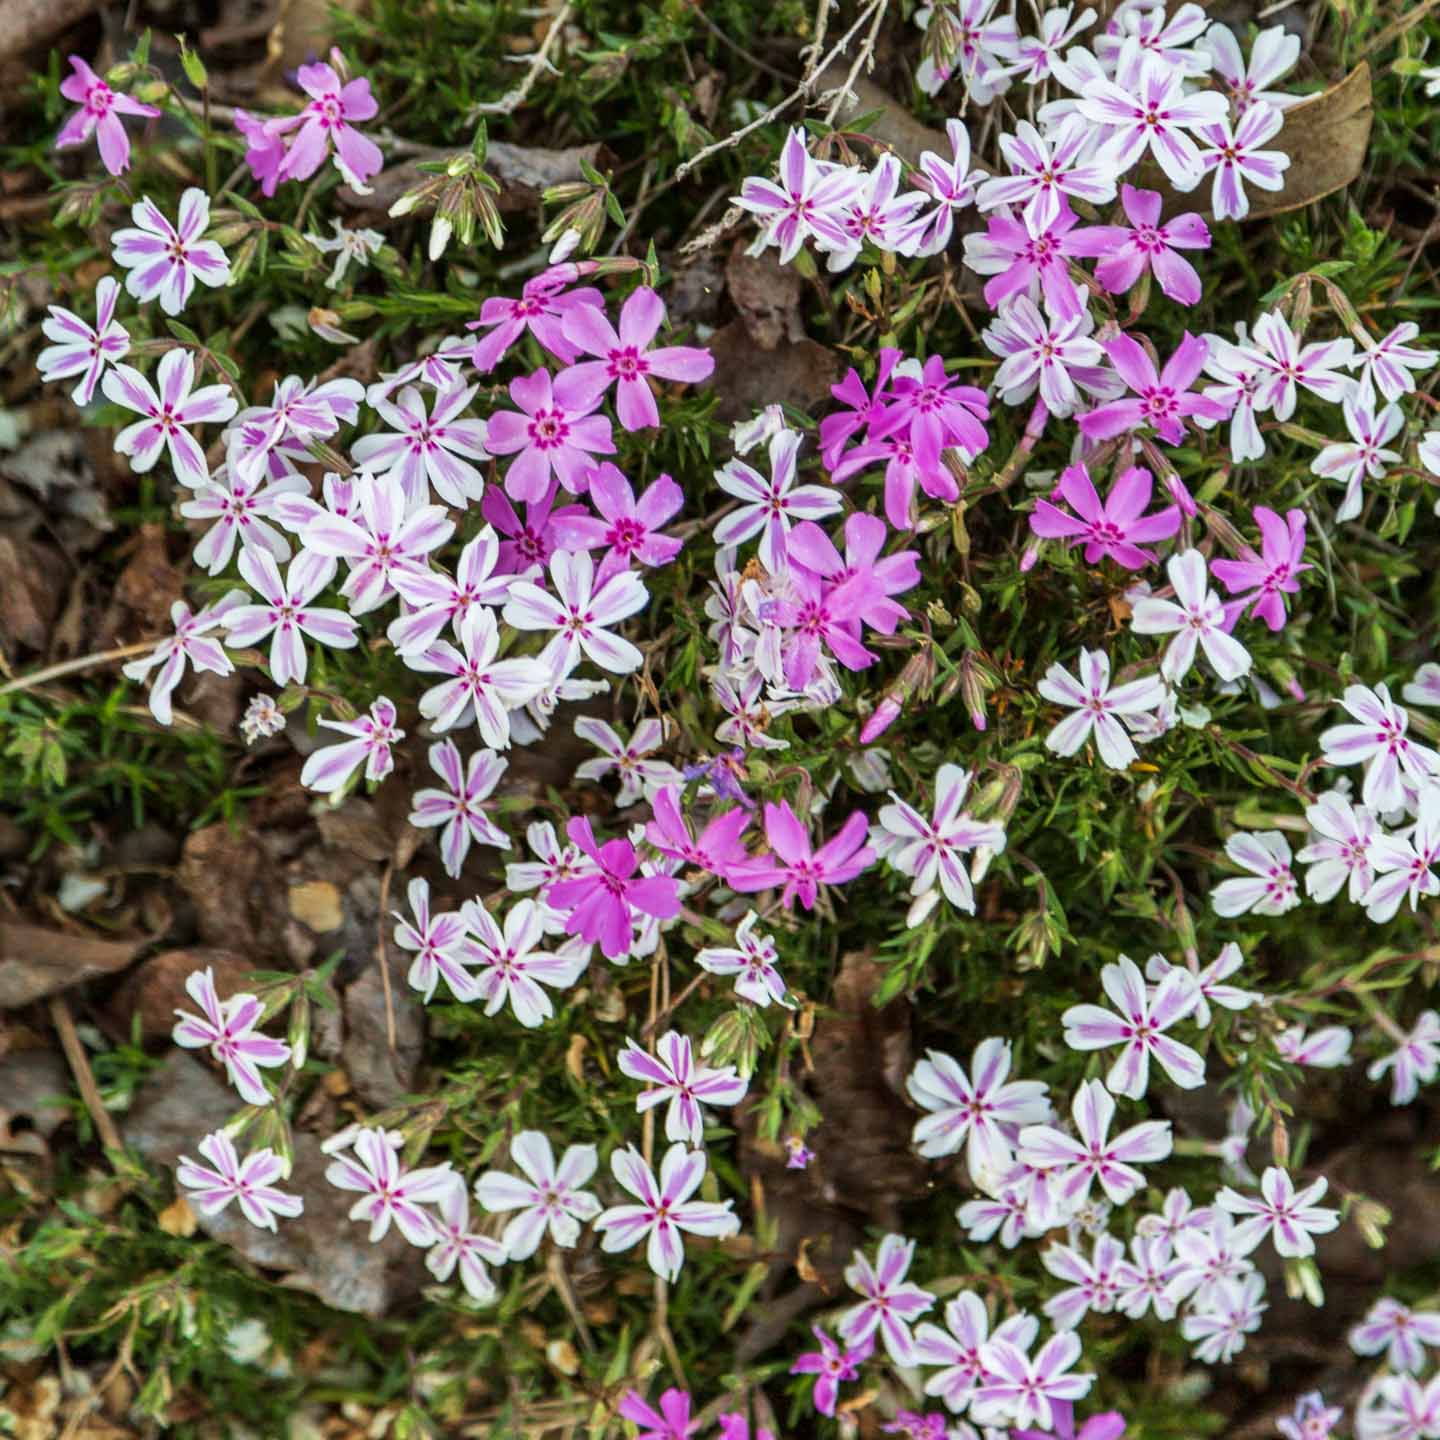 Phlox subulata 'Candy Stripe' with pink and white flowers